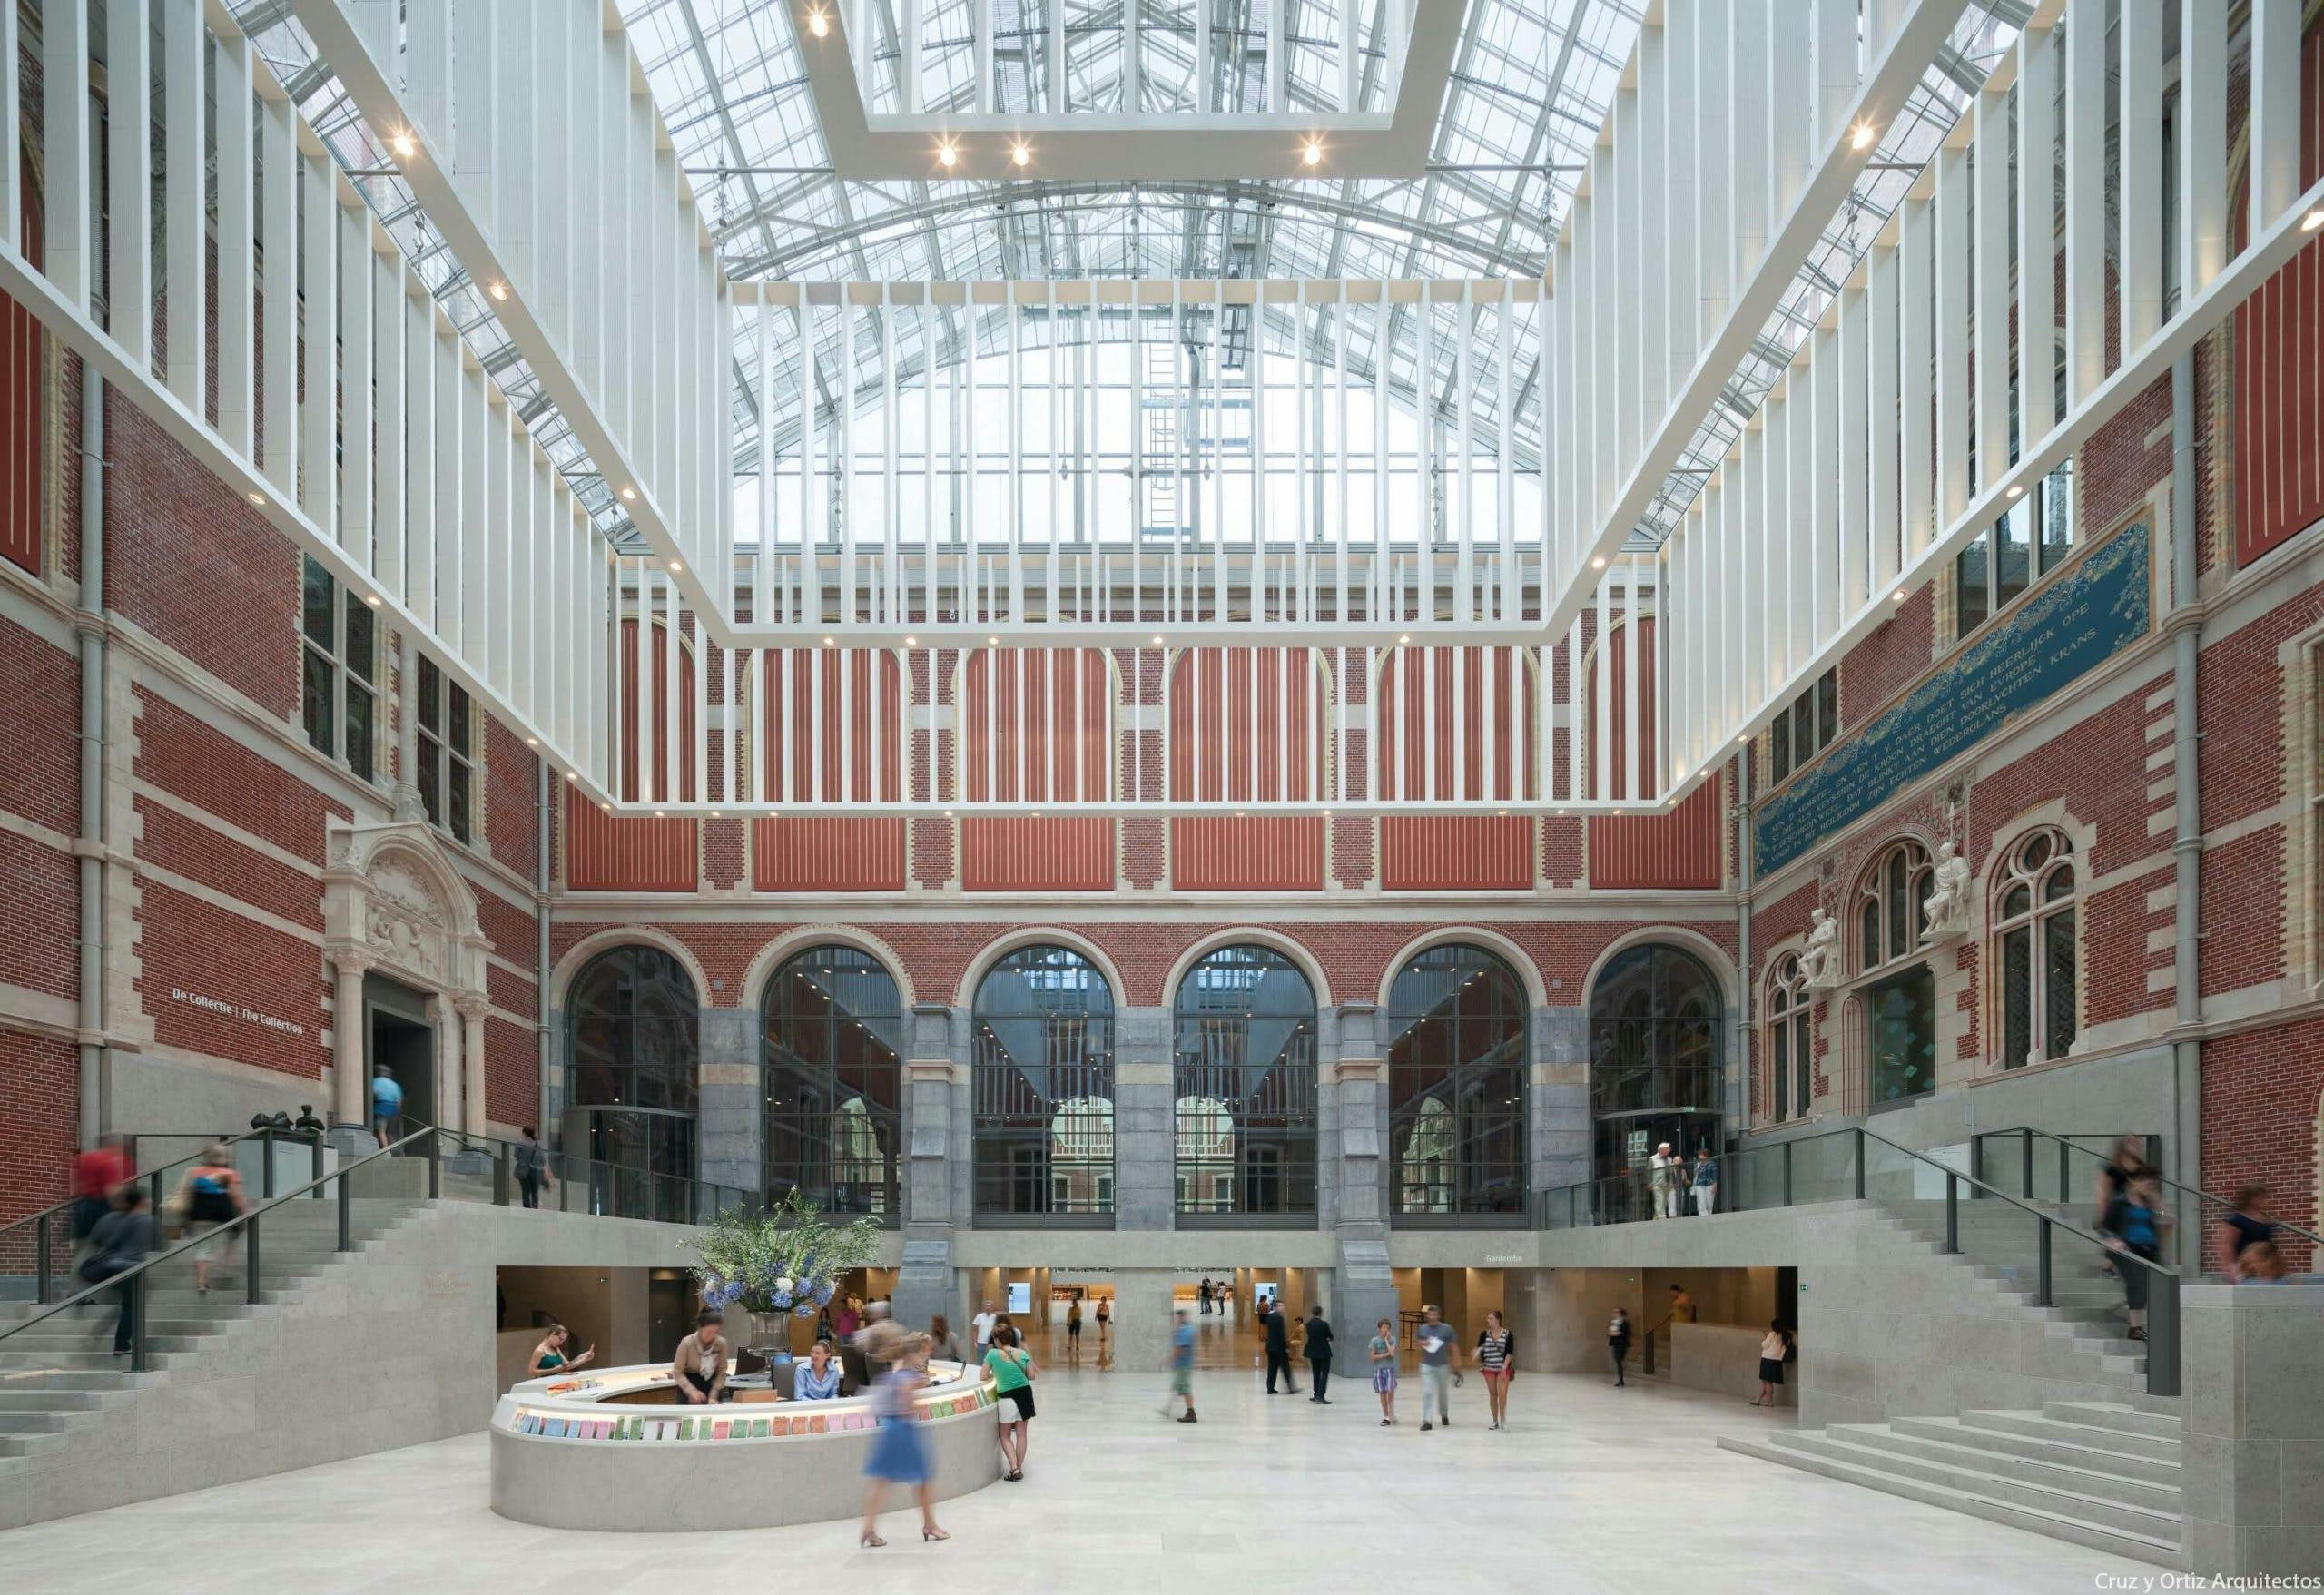 Image 35 of Rijksmuseum Renovation Cruz y Ortiz 1 scaled 1 in The best contemporary architecture in Amsterdam, now in C-guide - Cosentino